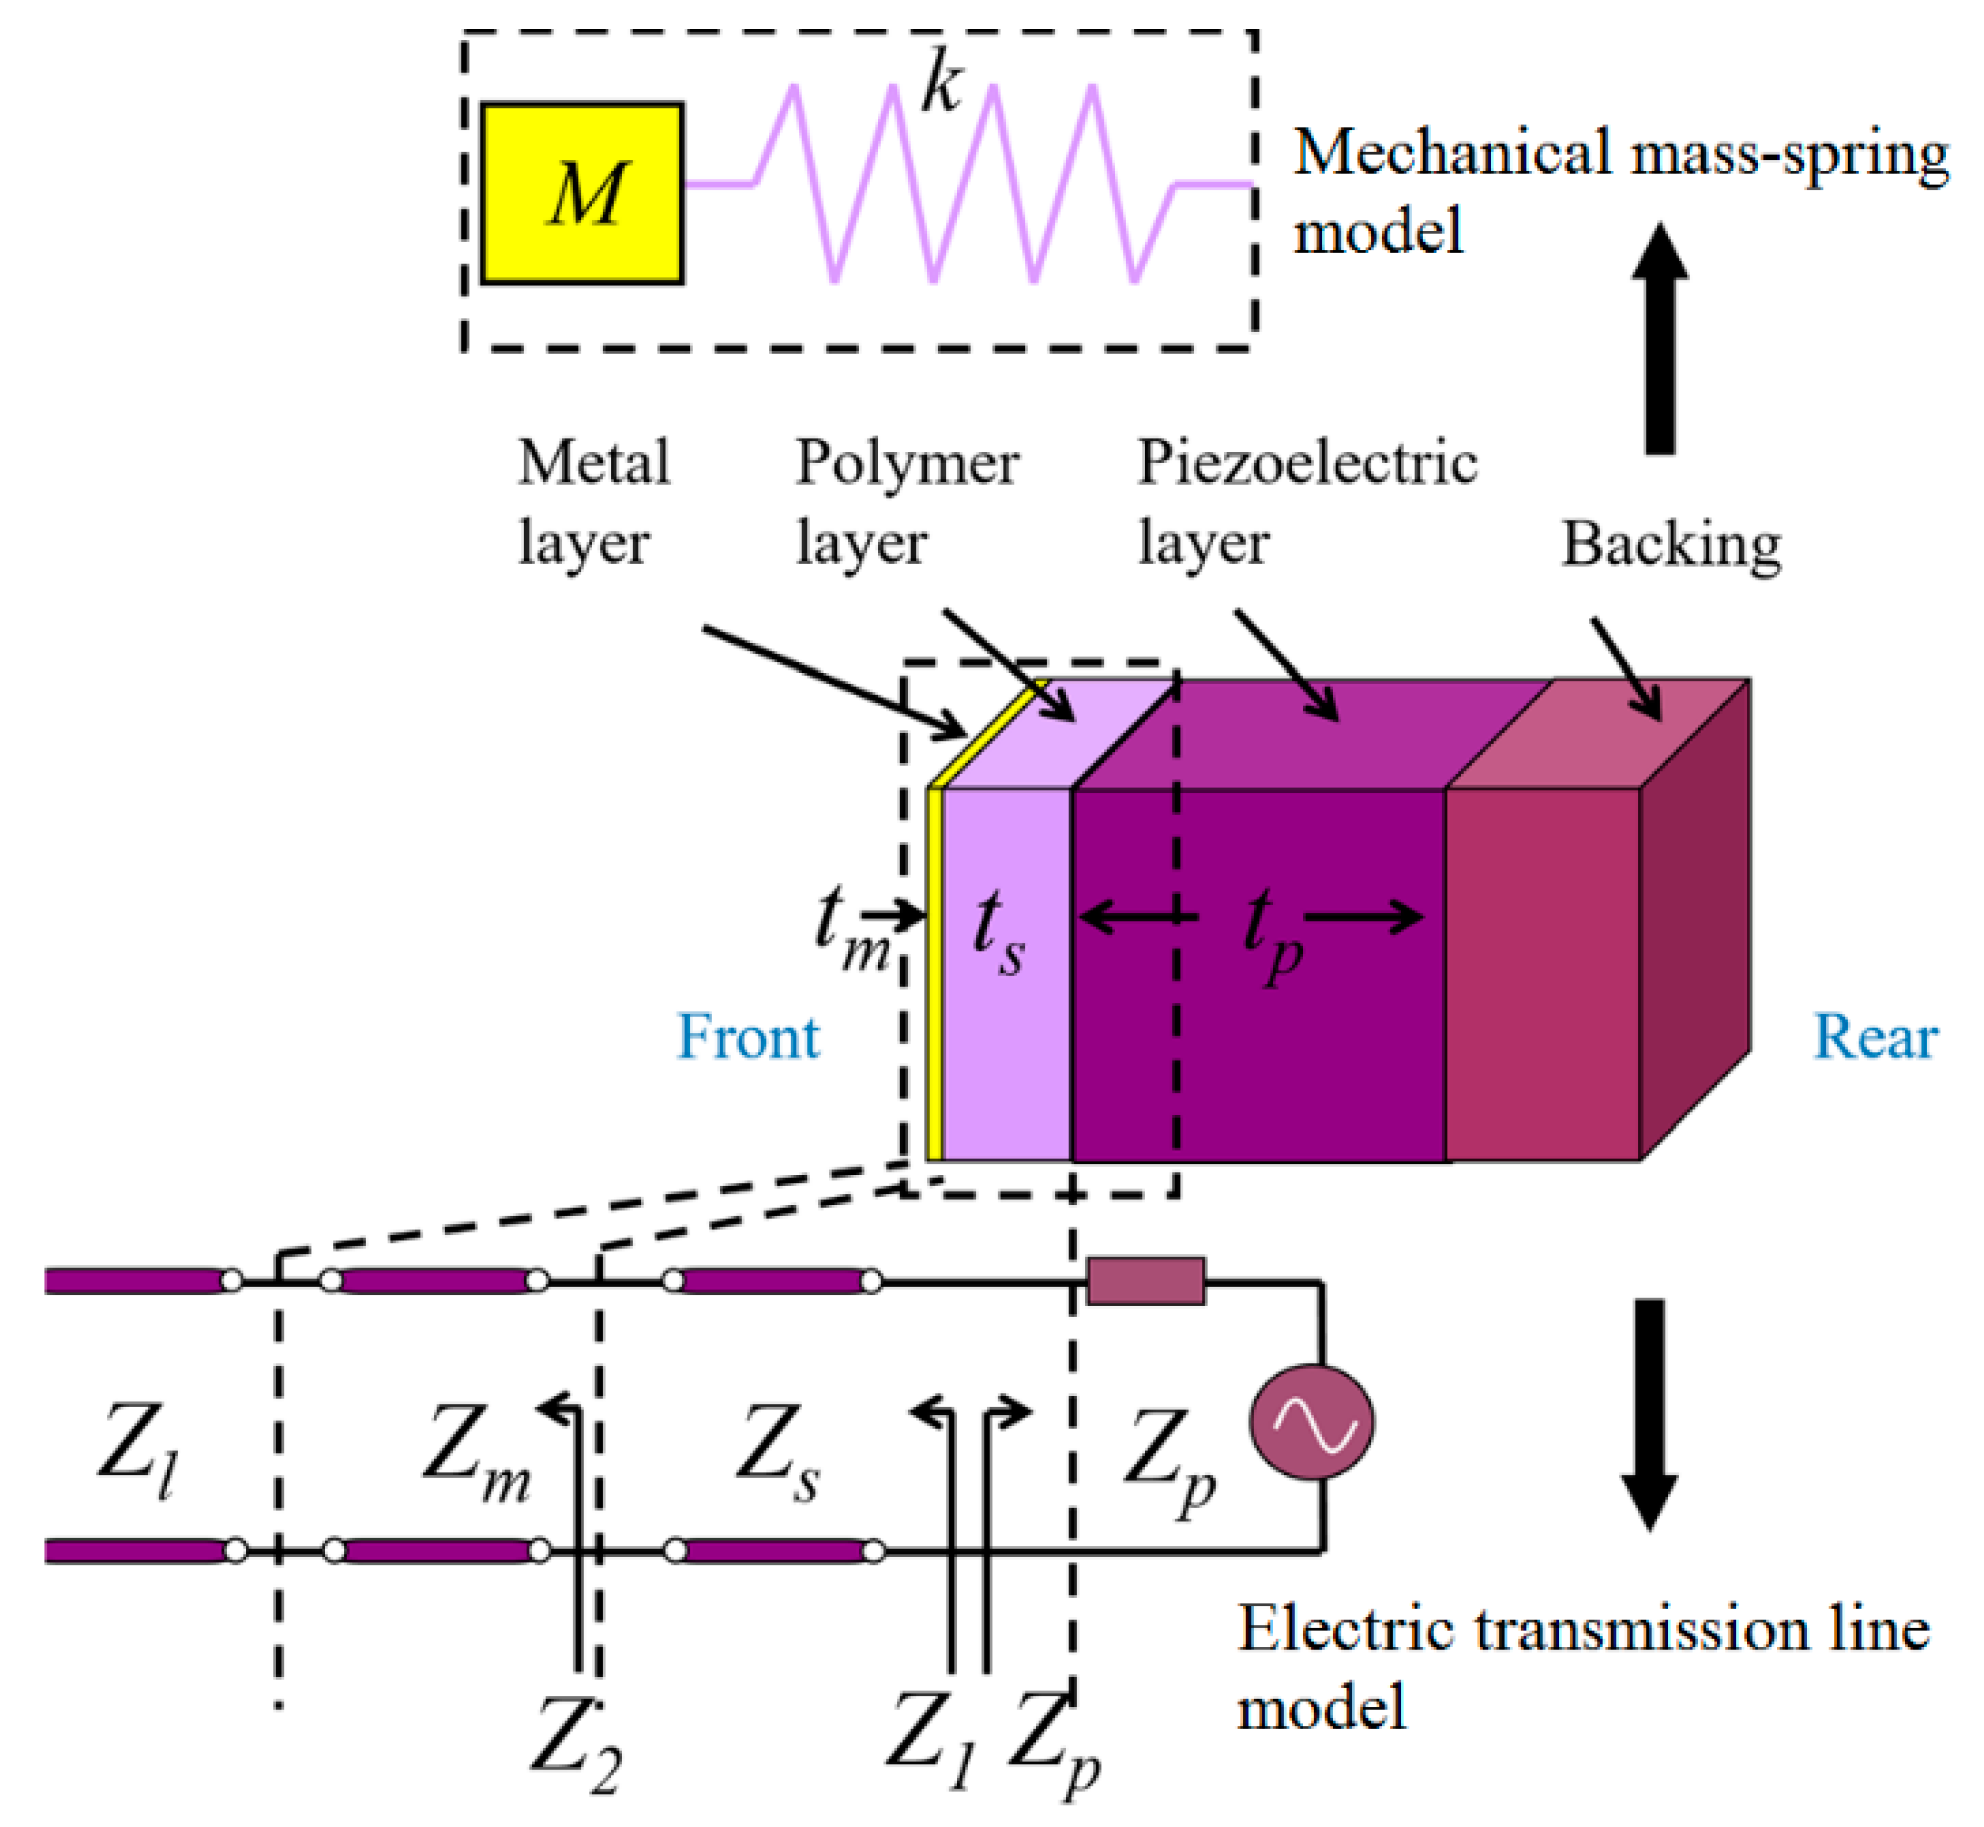 Sensors Free Full Text A Review Of Acoustic Impedance Matching Techniques For Piezoelectric Sensors And Transducers Html